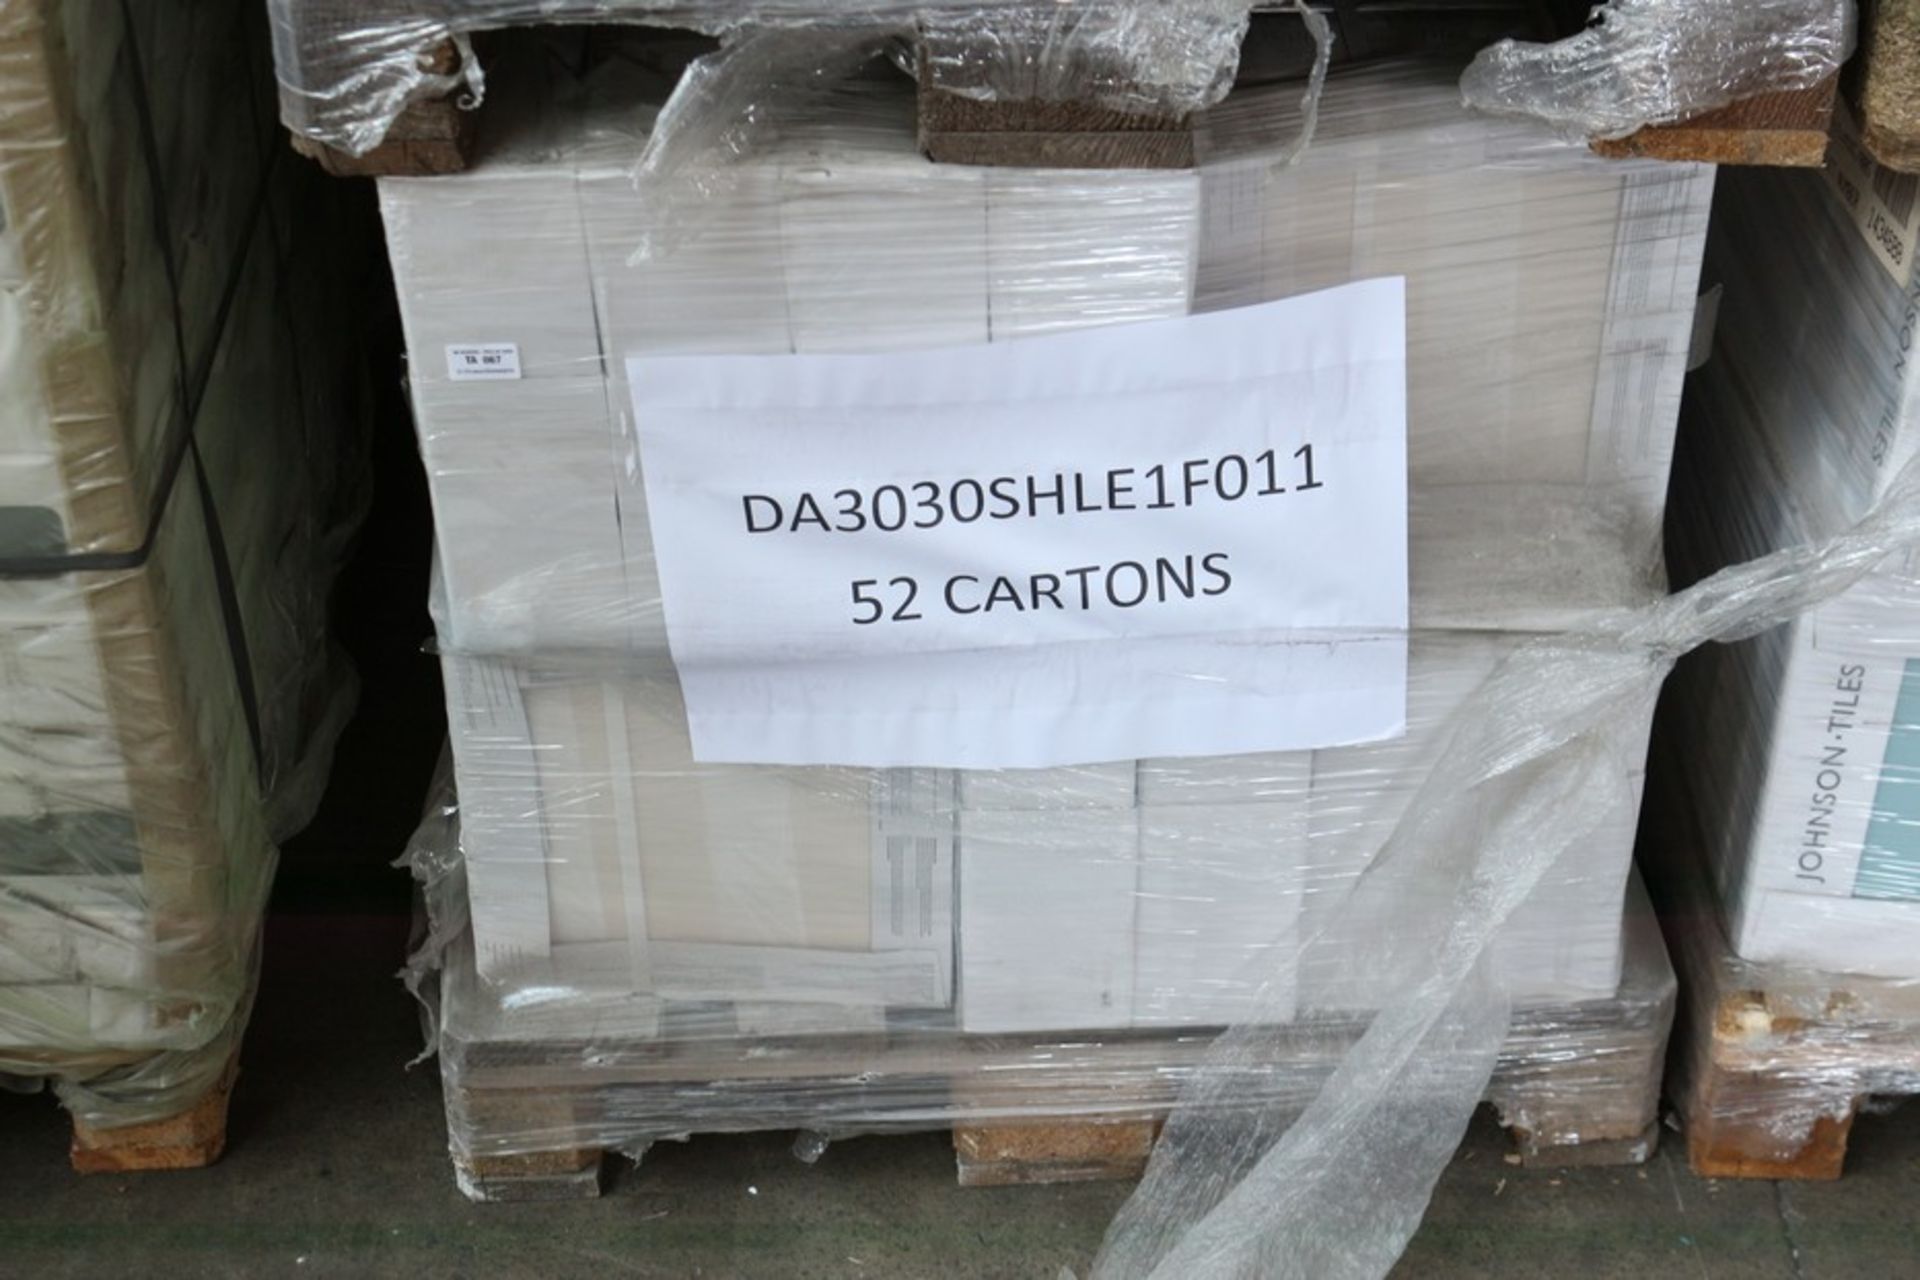 52X FACTORY SEALED BY JOHNSON TILES GLAZED WALL AND FLOOR TILES 300 X 300MM RRP £18.59 PER CARTON - Image 2 of 2